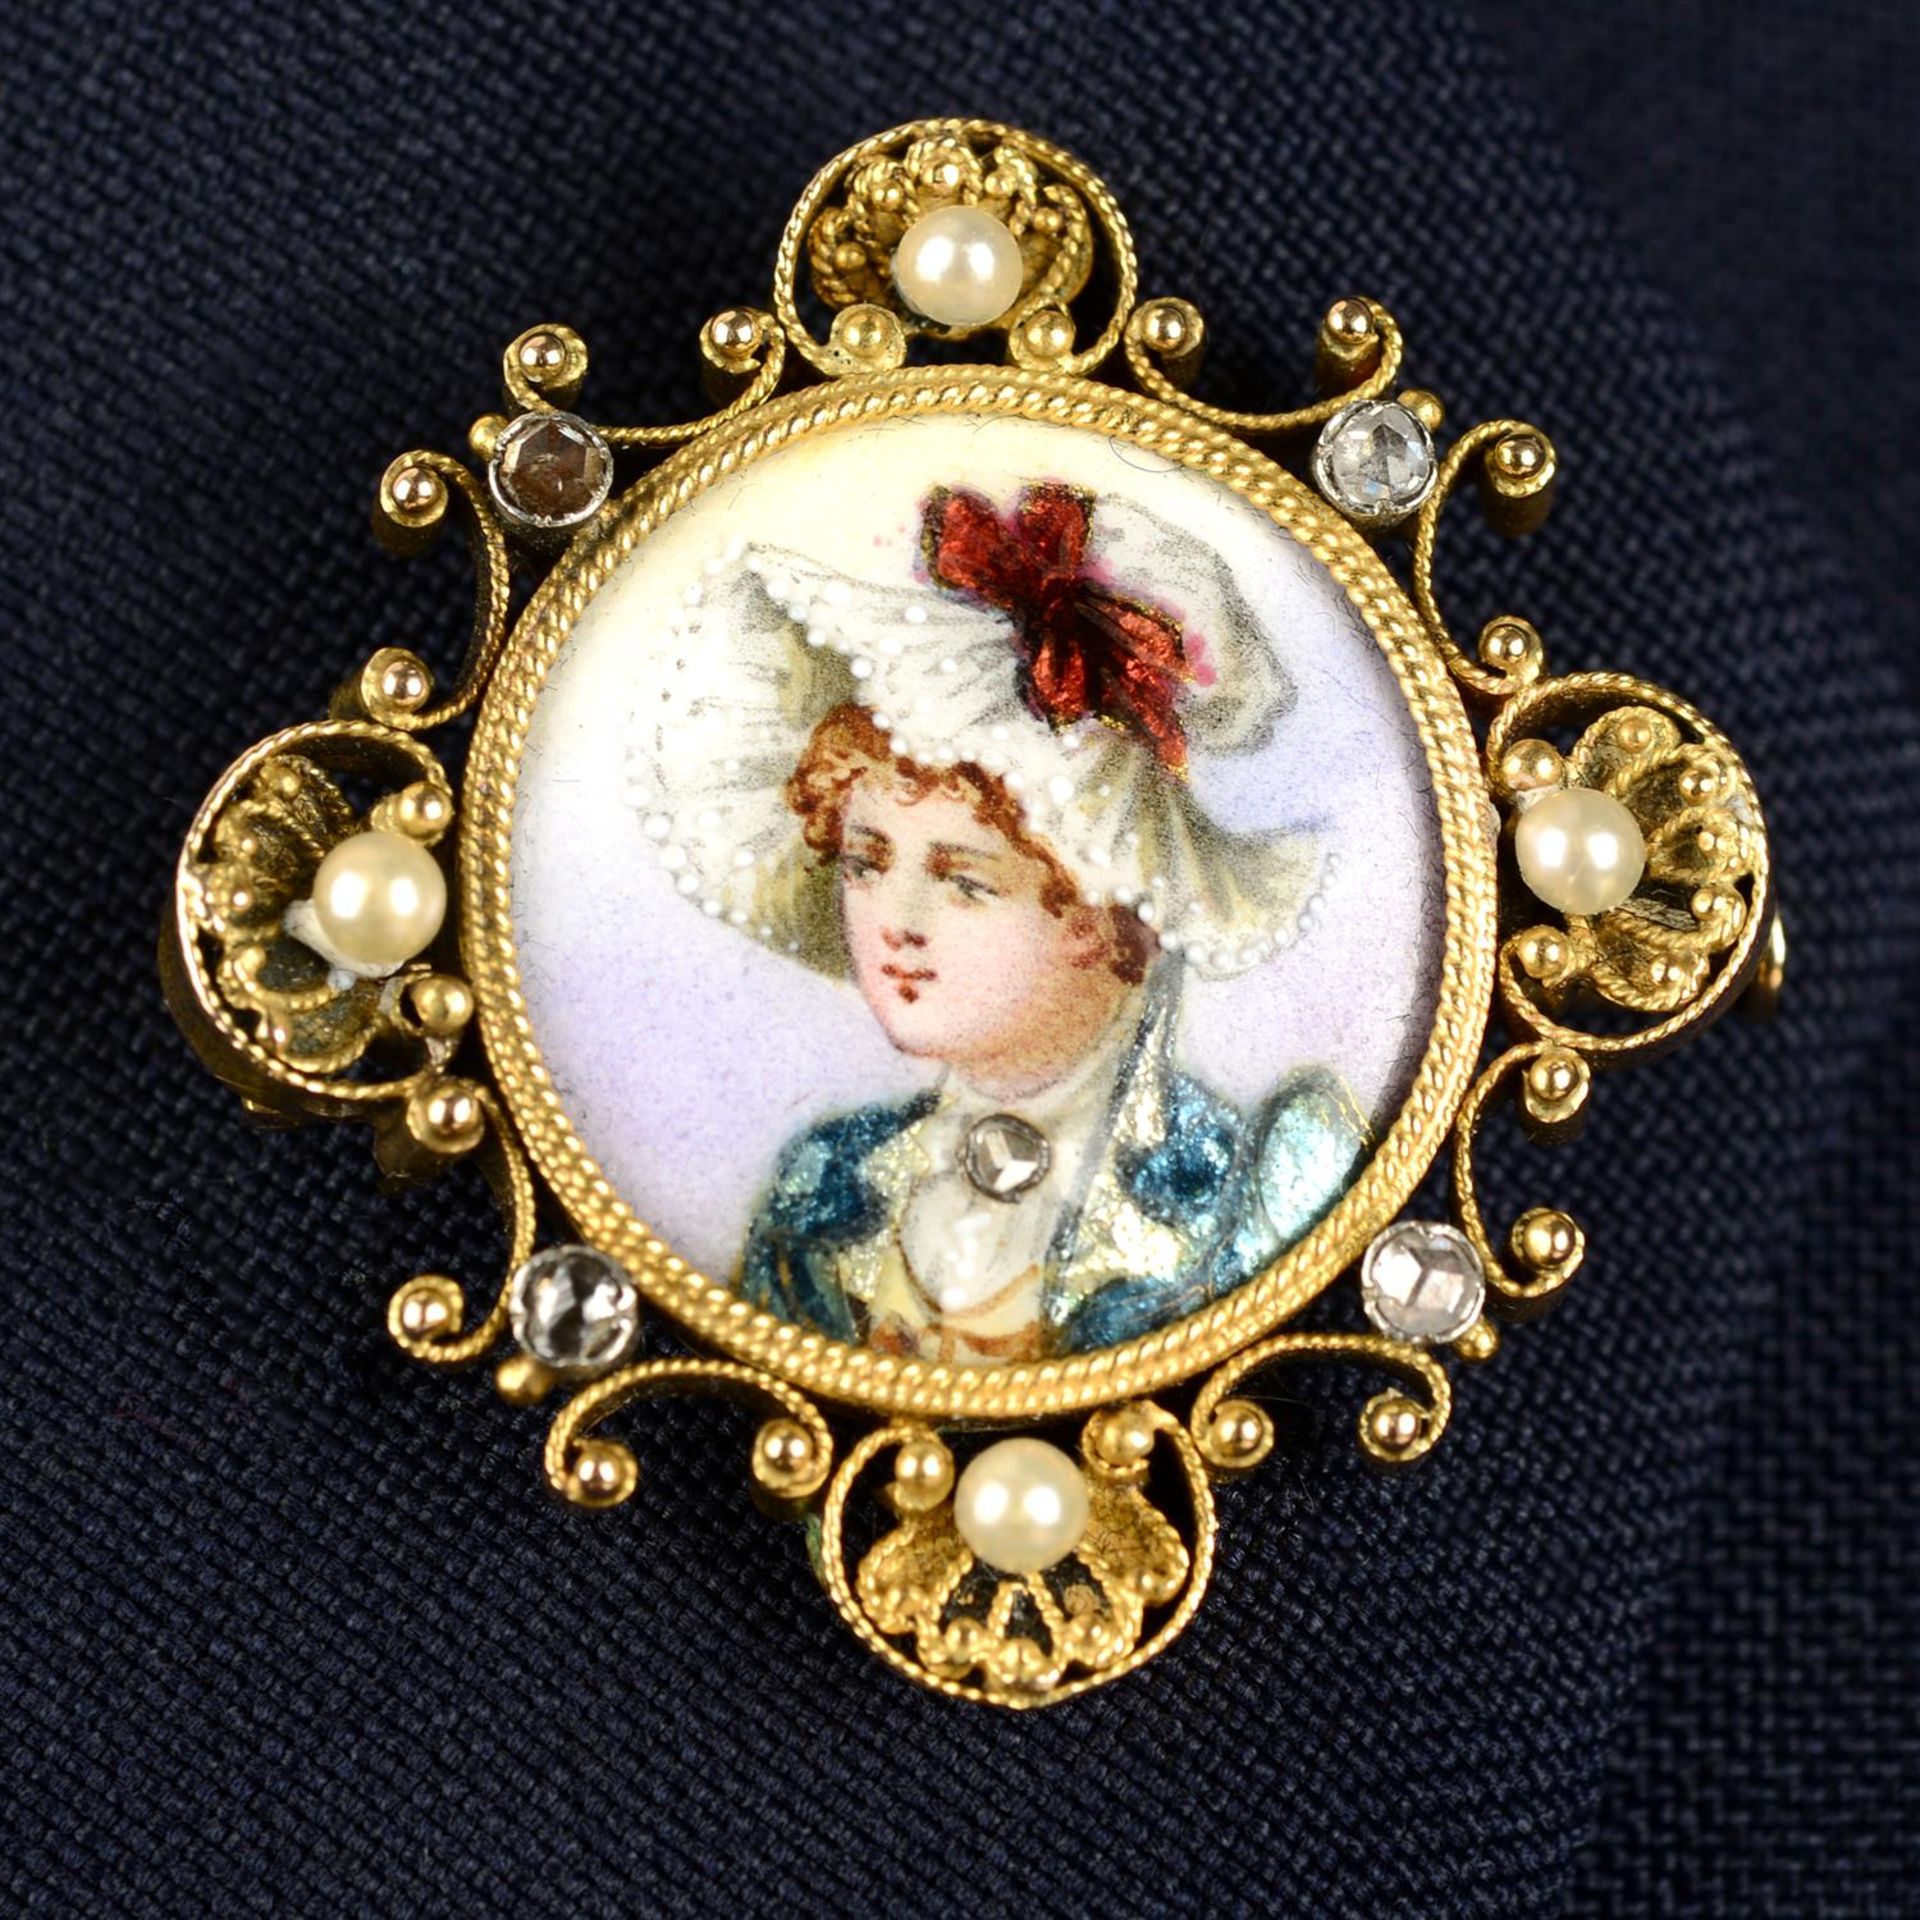 An early 20th century gold mounted enamel brooch depicting a woman, to a shell and scroll